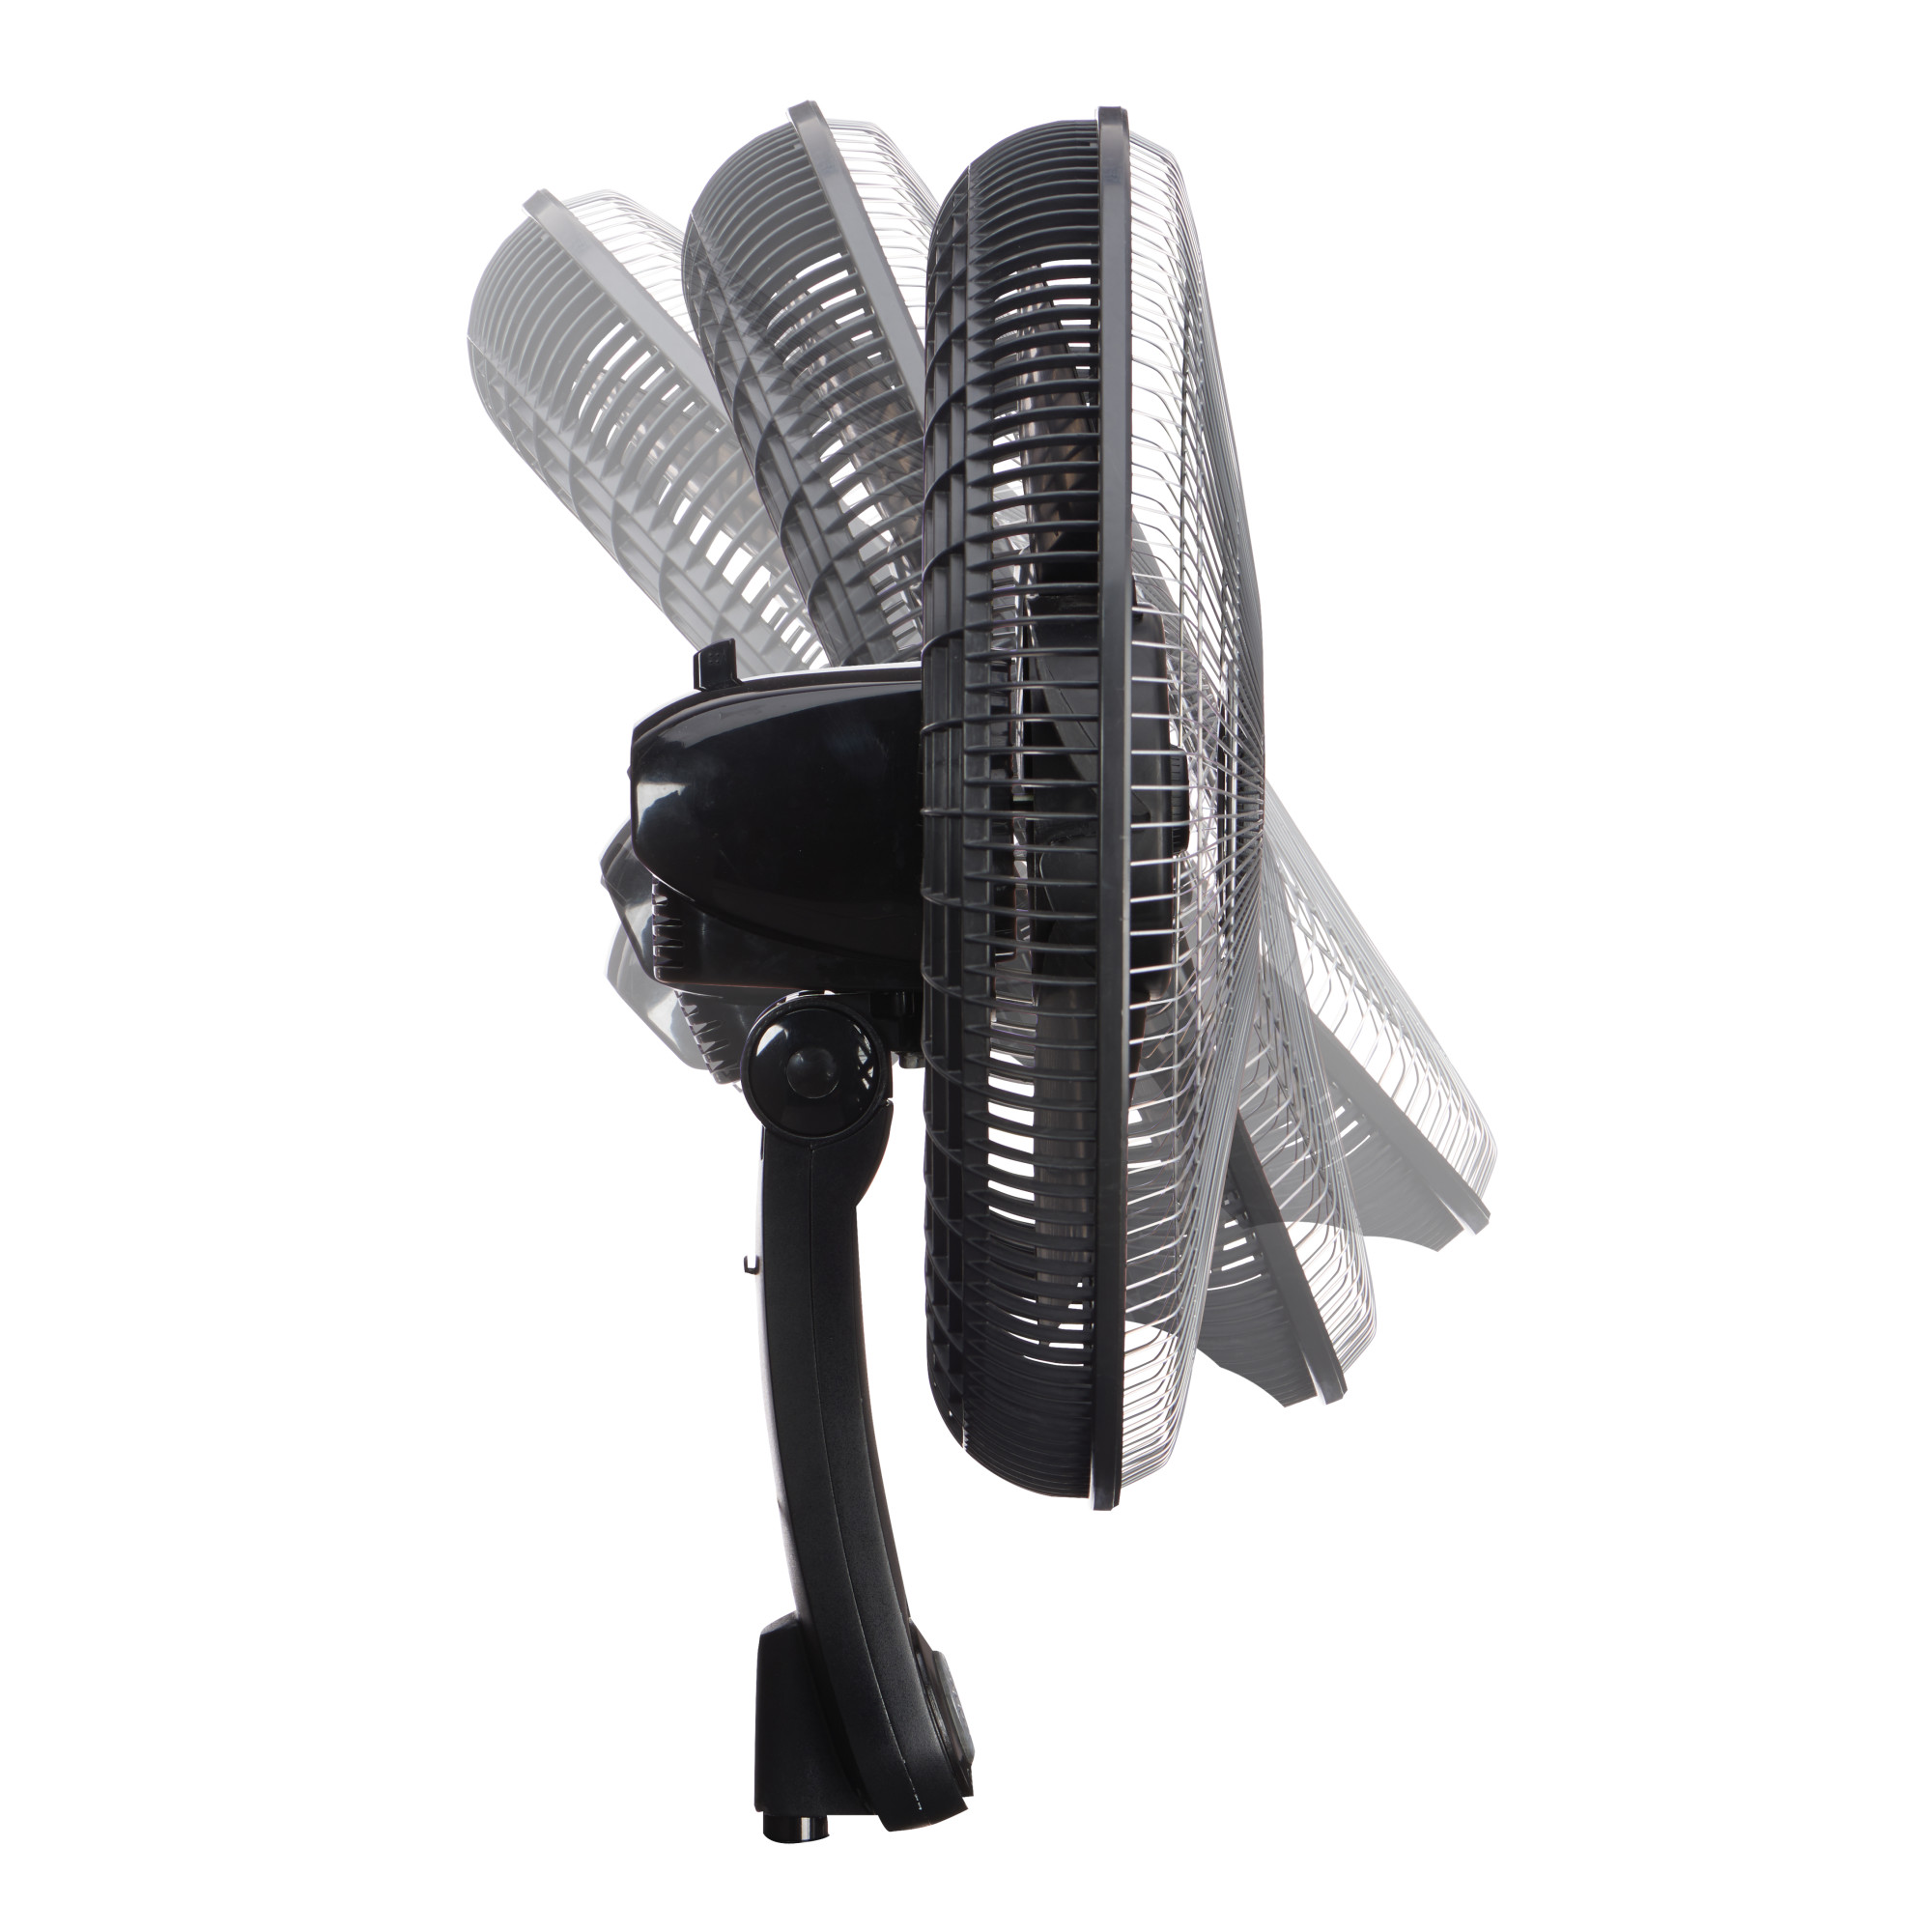 Lasko 18" 5-Speed High Performance Pedestal Fan with Remote, 54" H, Black, S18602, New - image 4 of 7